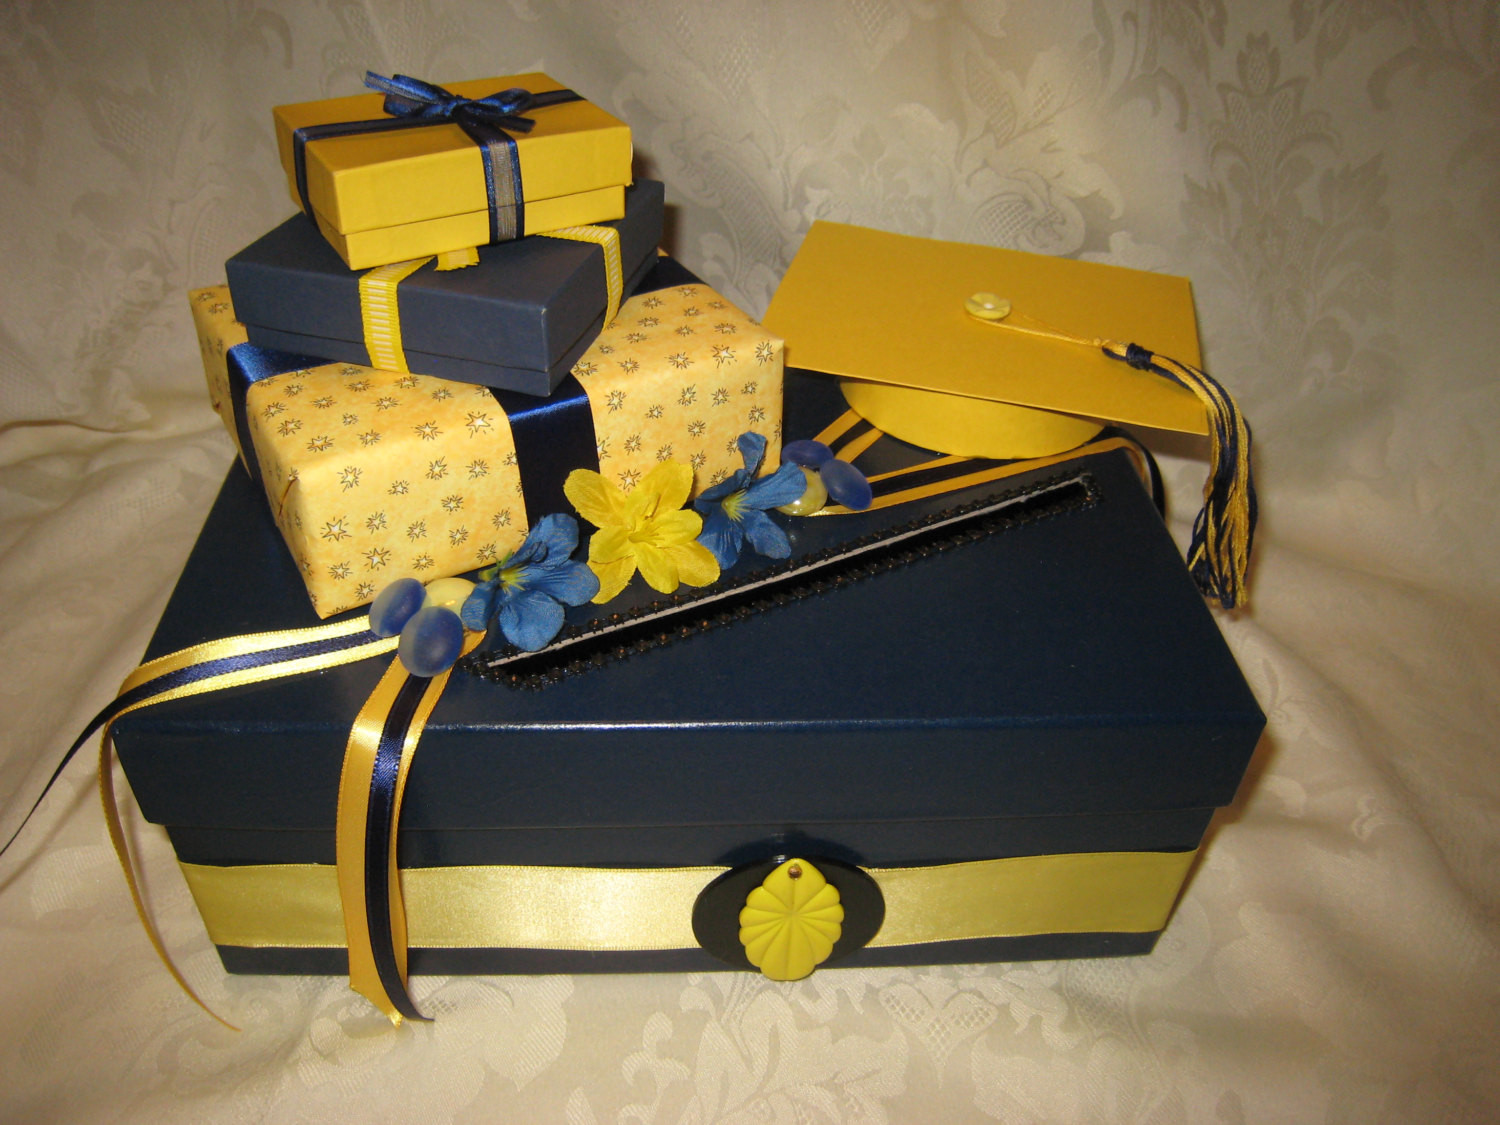 Blue And Gold Graduation Party Ideas
 Navy Blue Gold Yellow Graduation Party Card Box